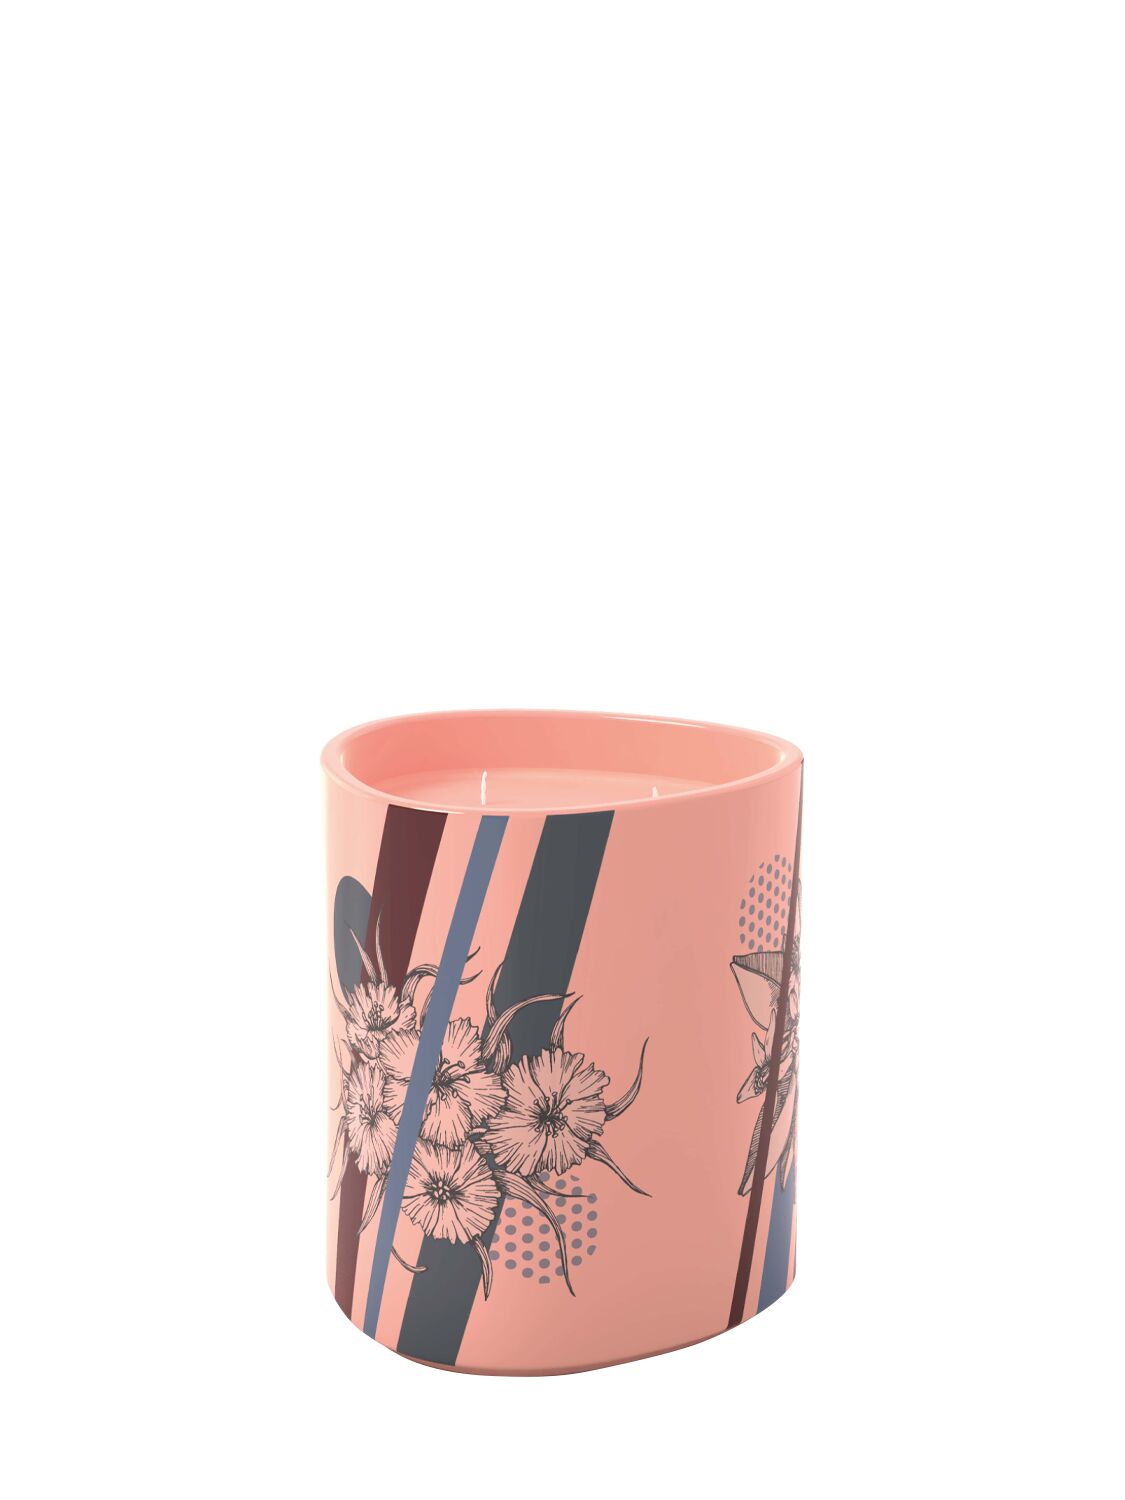 Essensitive 600克zyz Candle香氛蜡烛 In Pink